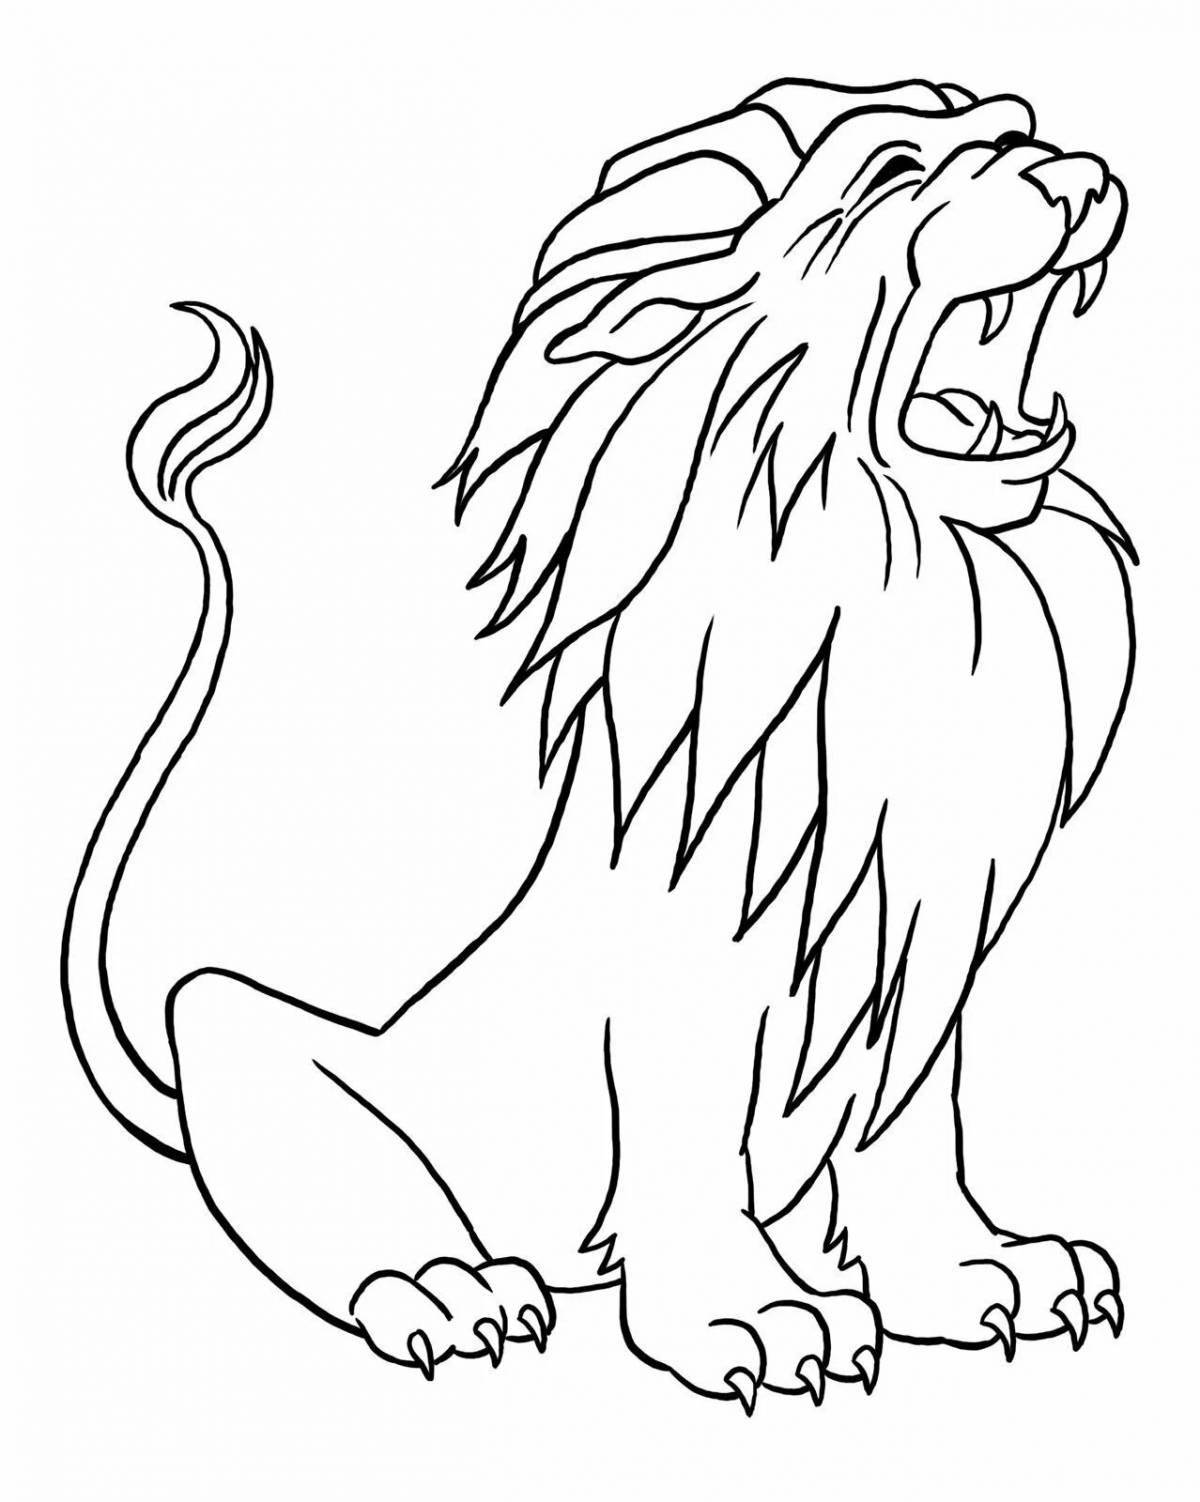 Coloring book shining lion for kids